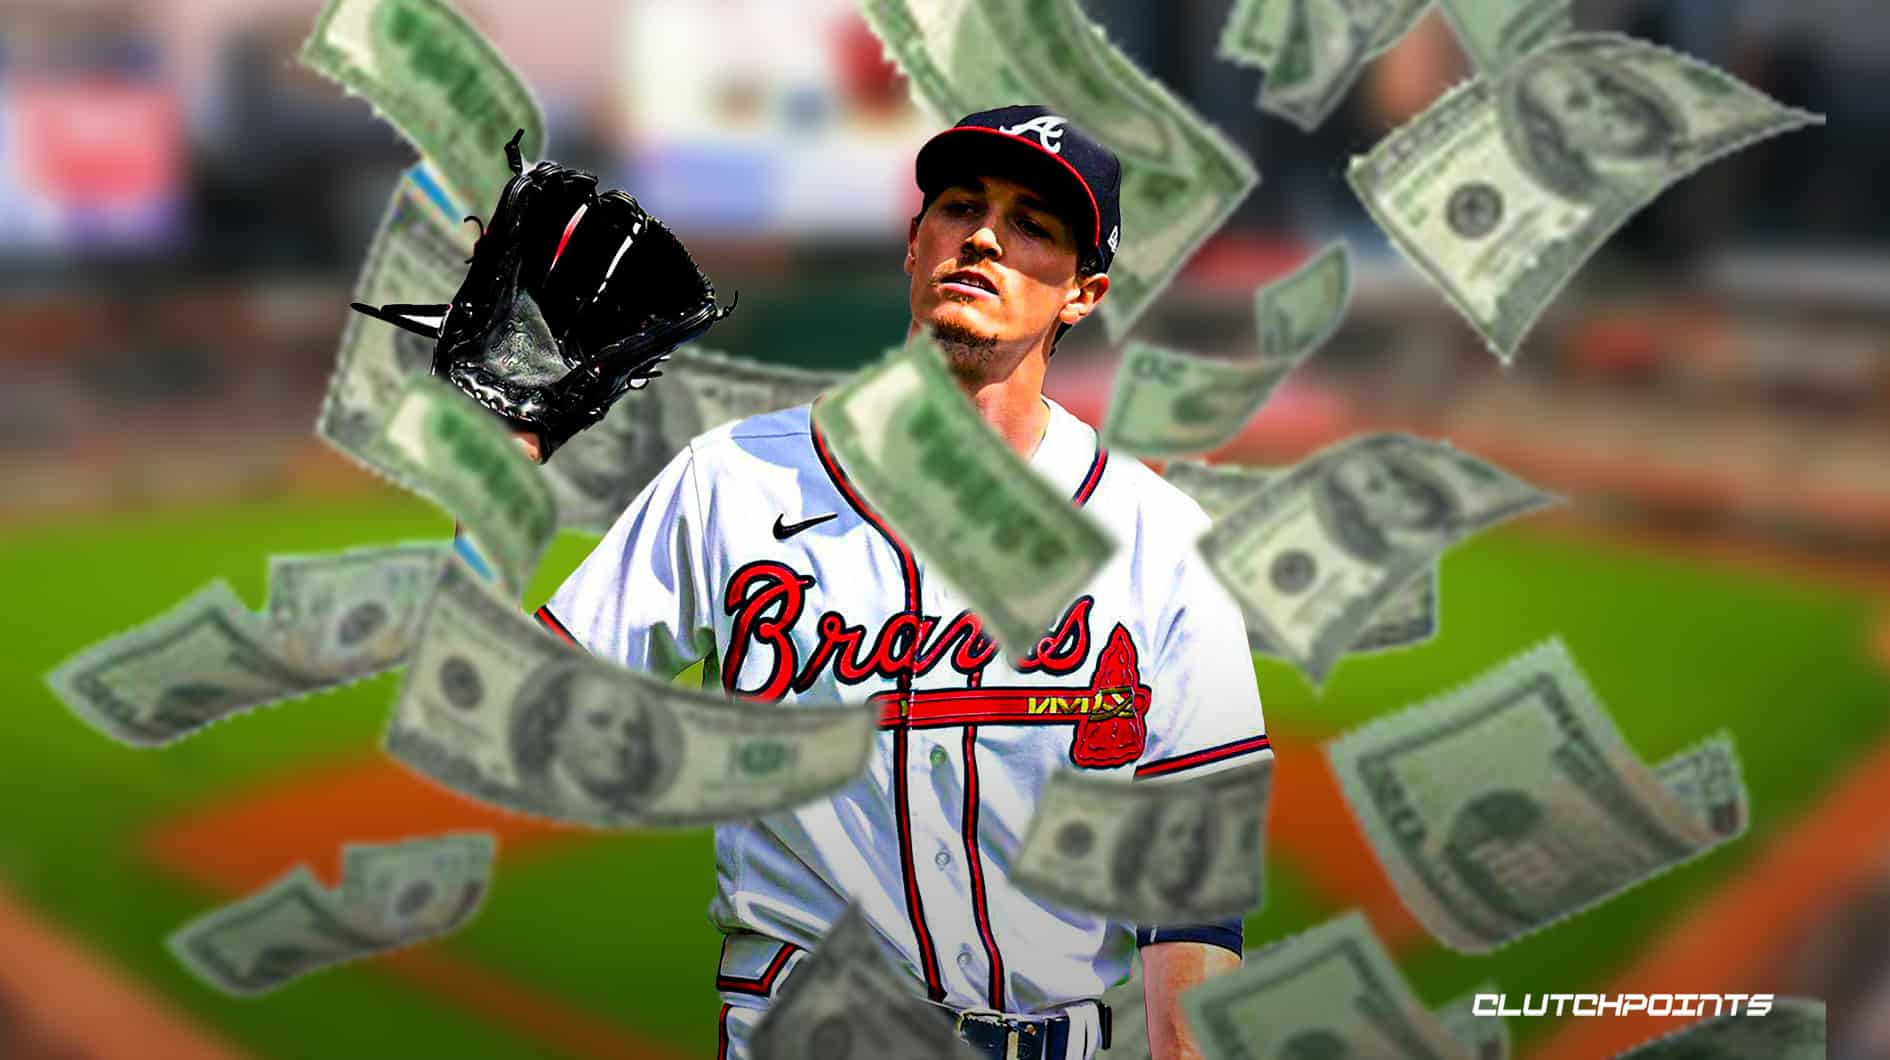 Max Fried beats Braves in arbitration, gets $6.85 million